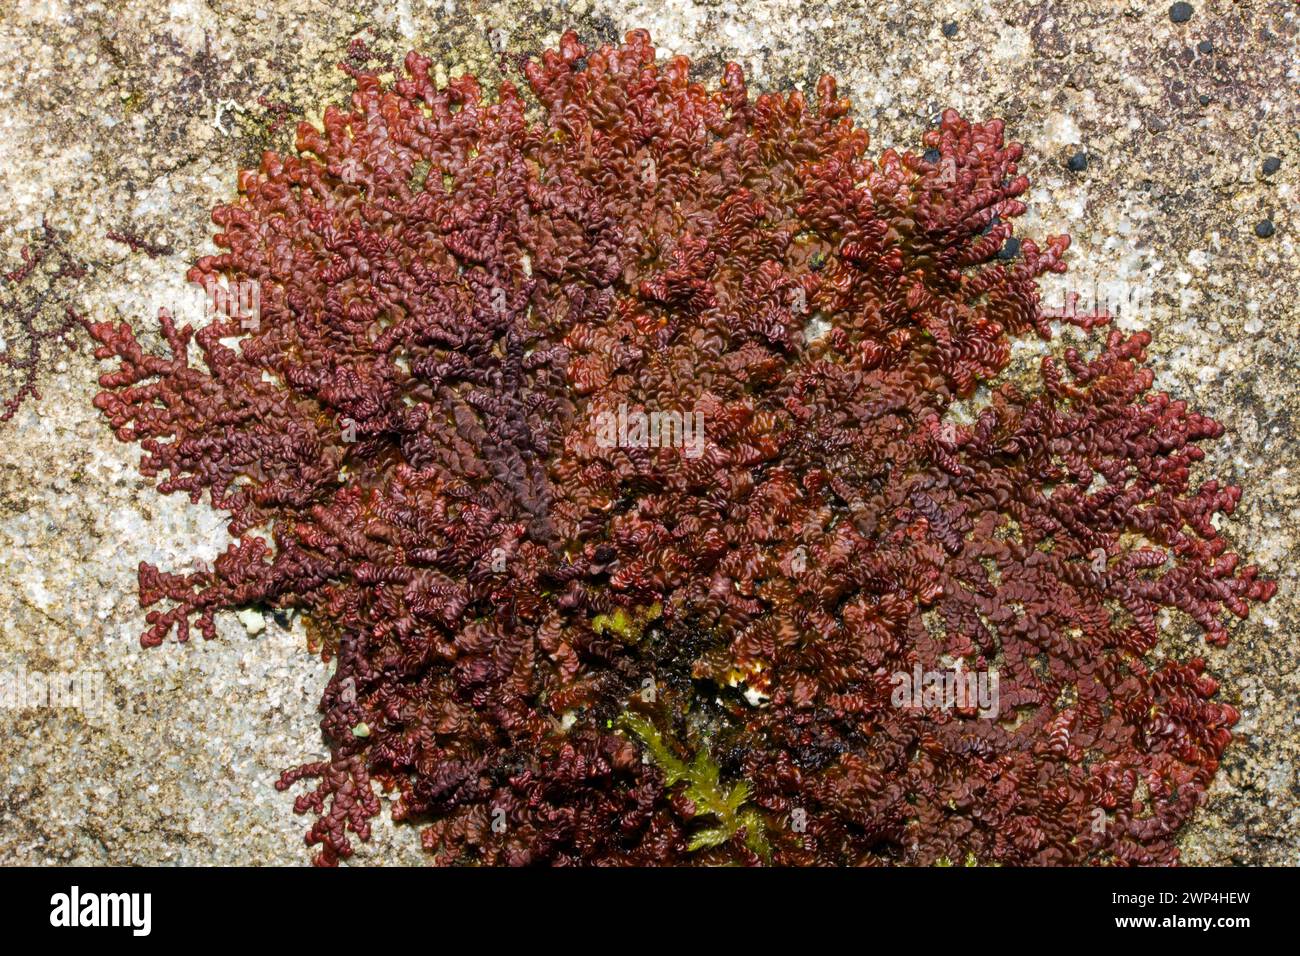 Frullania dilatata (Dilated Scalewort) is common on trees and rocks. It has been recorded in Asia, Europe, N. America, S. America and Africa. Stock Photo